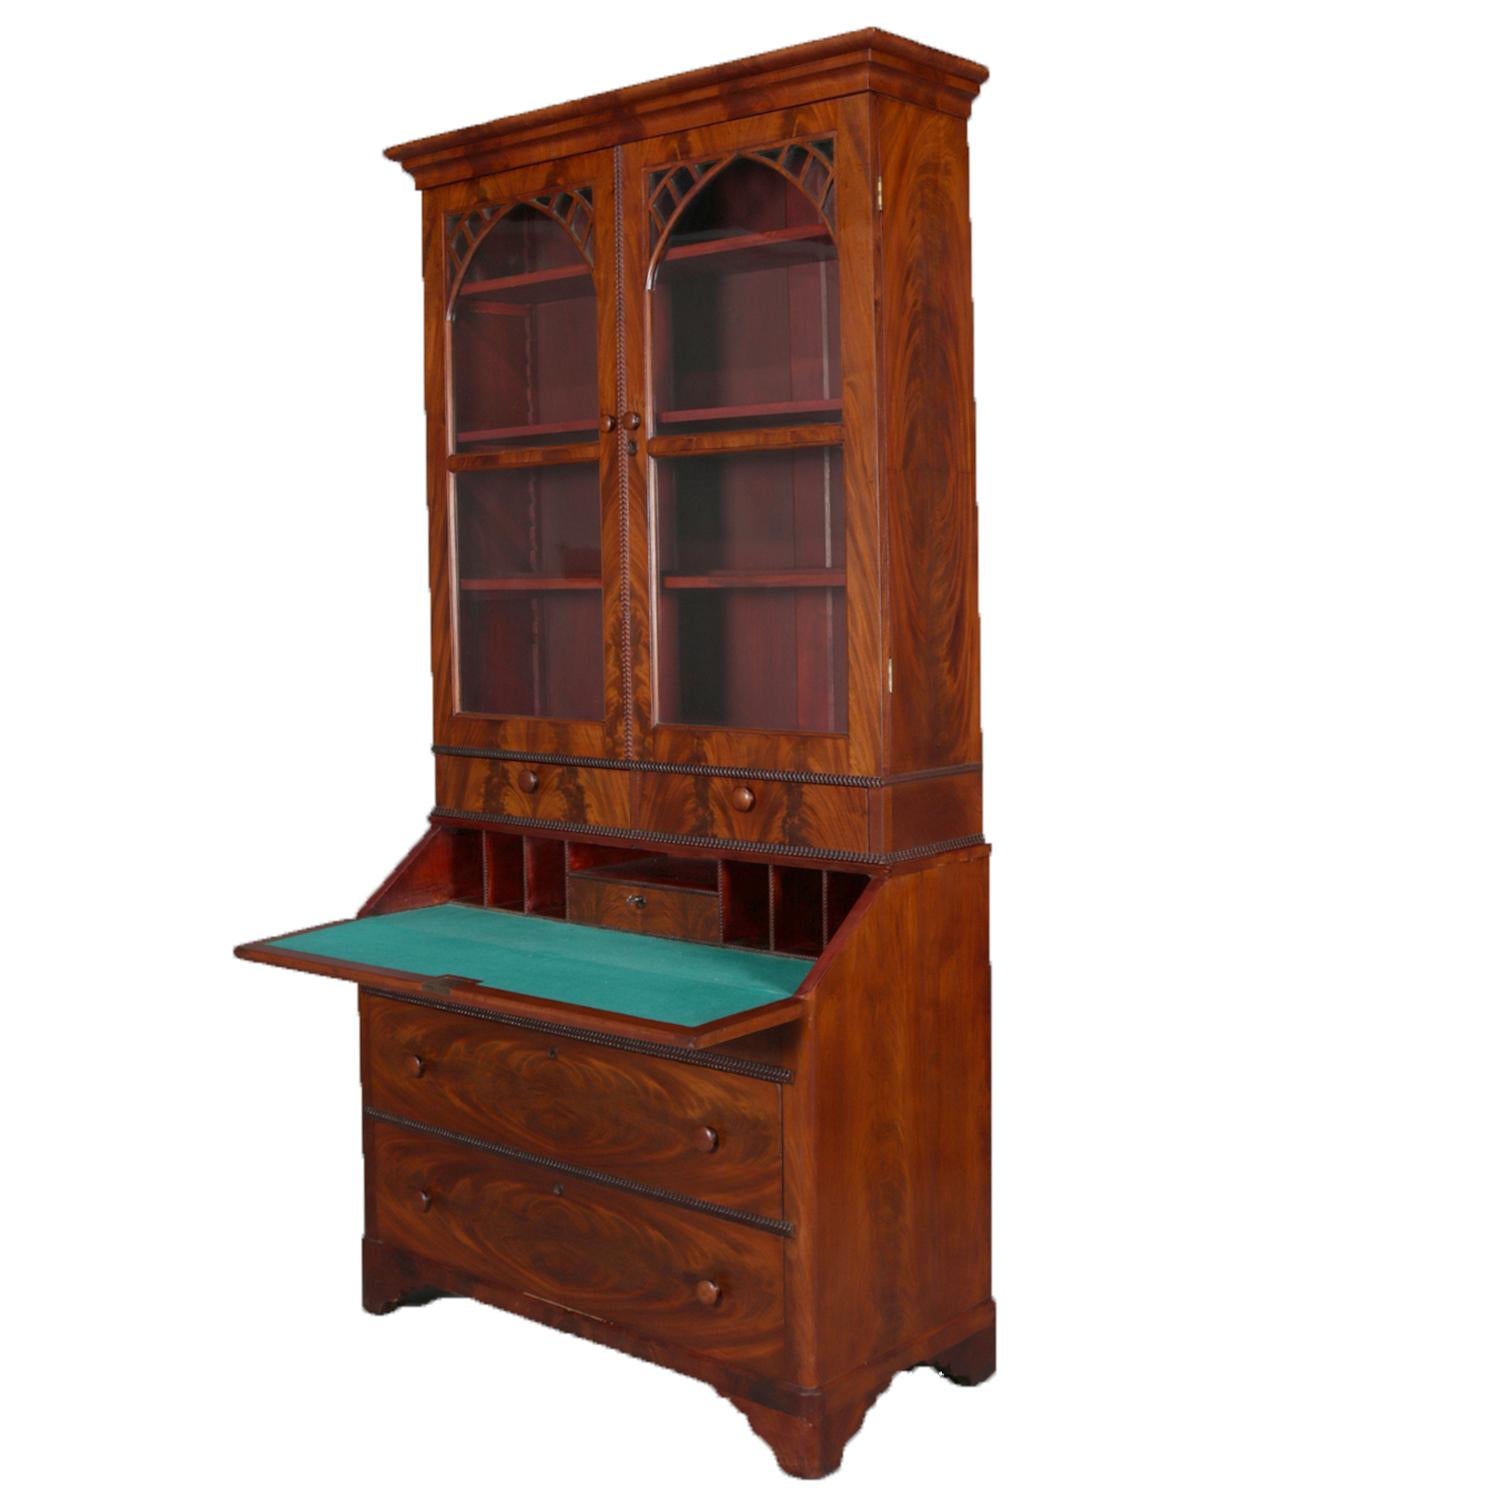 Antique American Empire flame mahogany secretary features upper bookcase with double fretwork and arch form glass doors opening to shelved interior and over secretary with drop front desk having felt writing surface and pigeon holes over case with